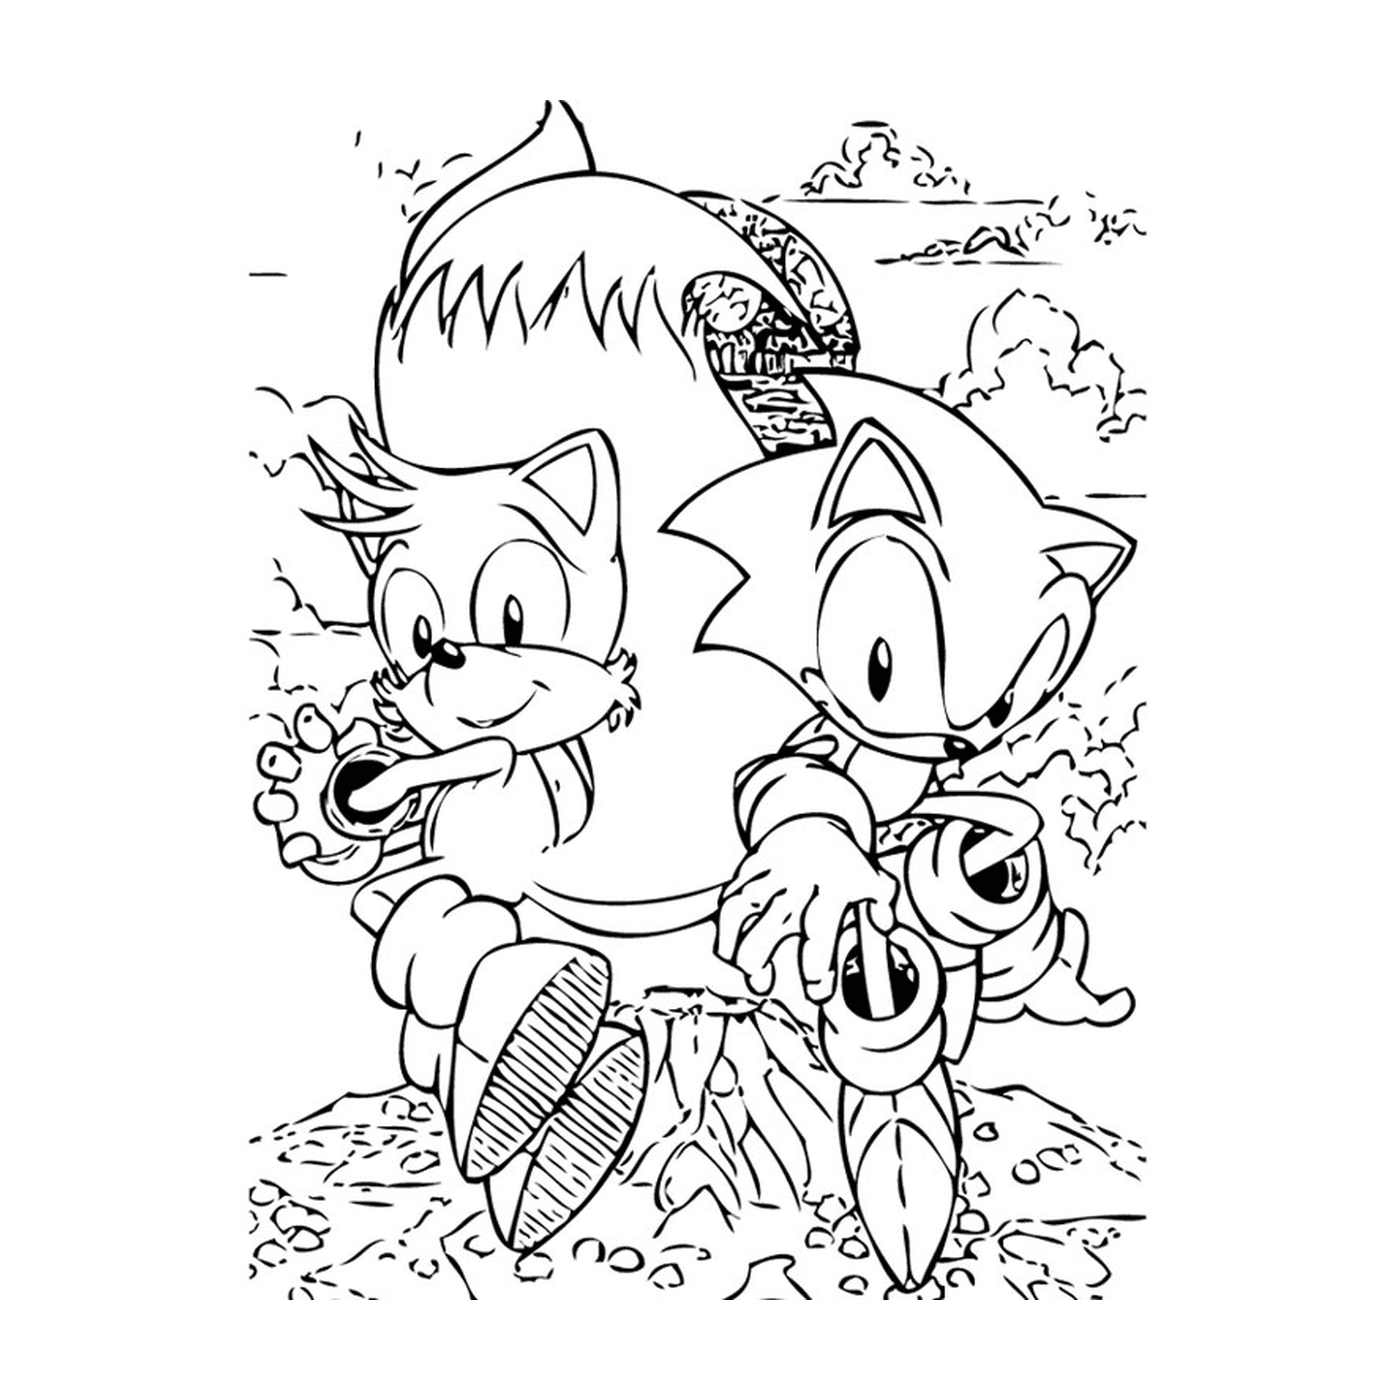  Sonic and Tails in duet 